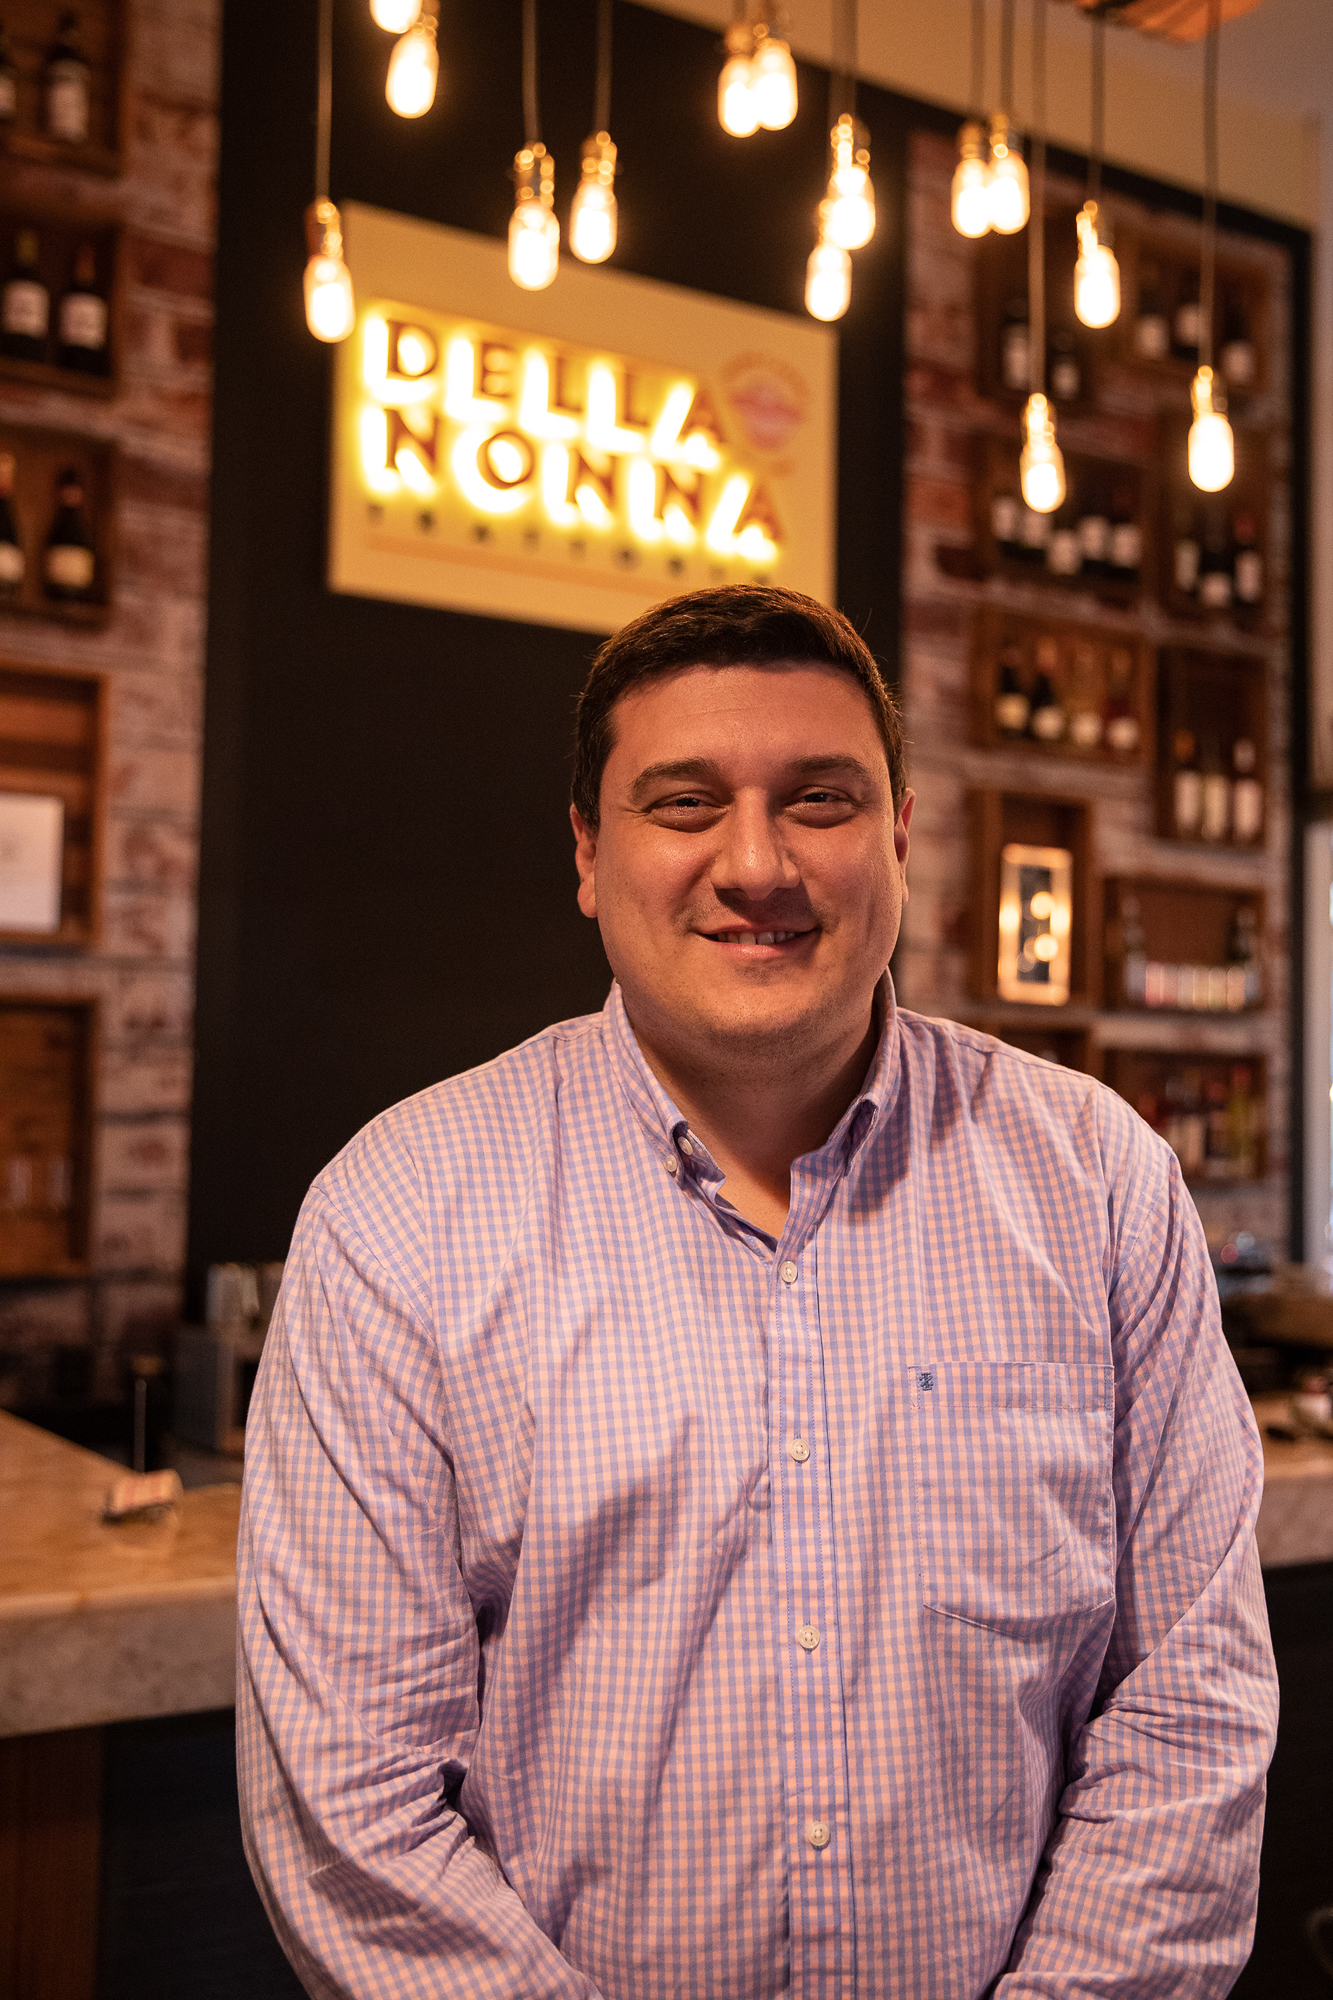 A man poses for a portrait in a button-up shirt inside of a restaurant while standing in front of a lighted sign that says 'Della Nonna'.